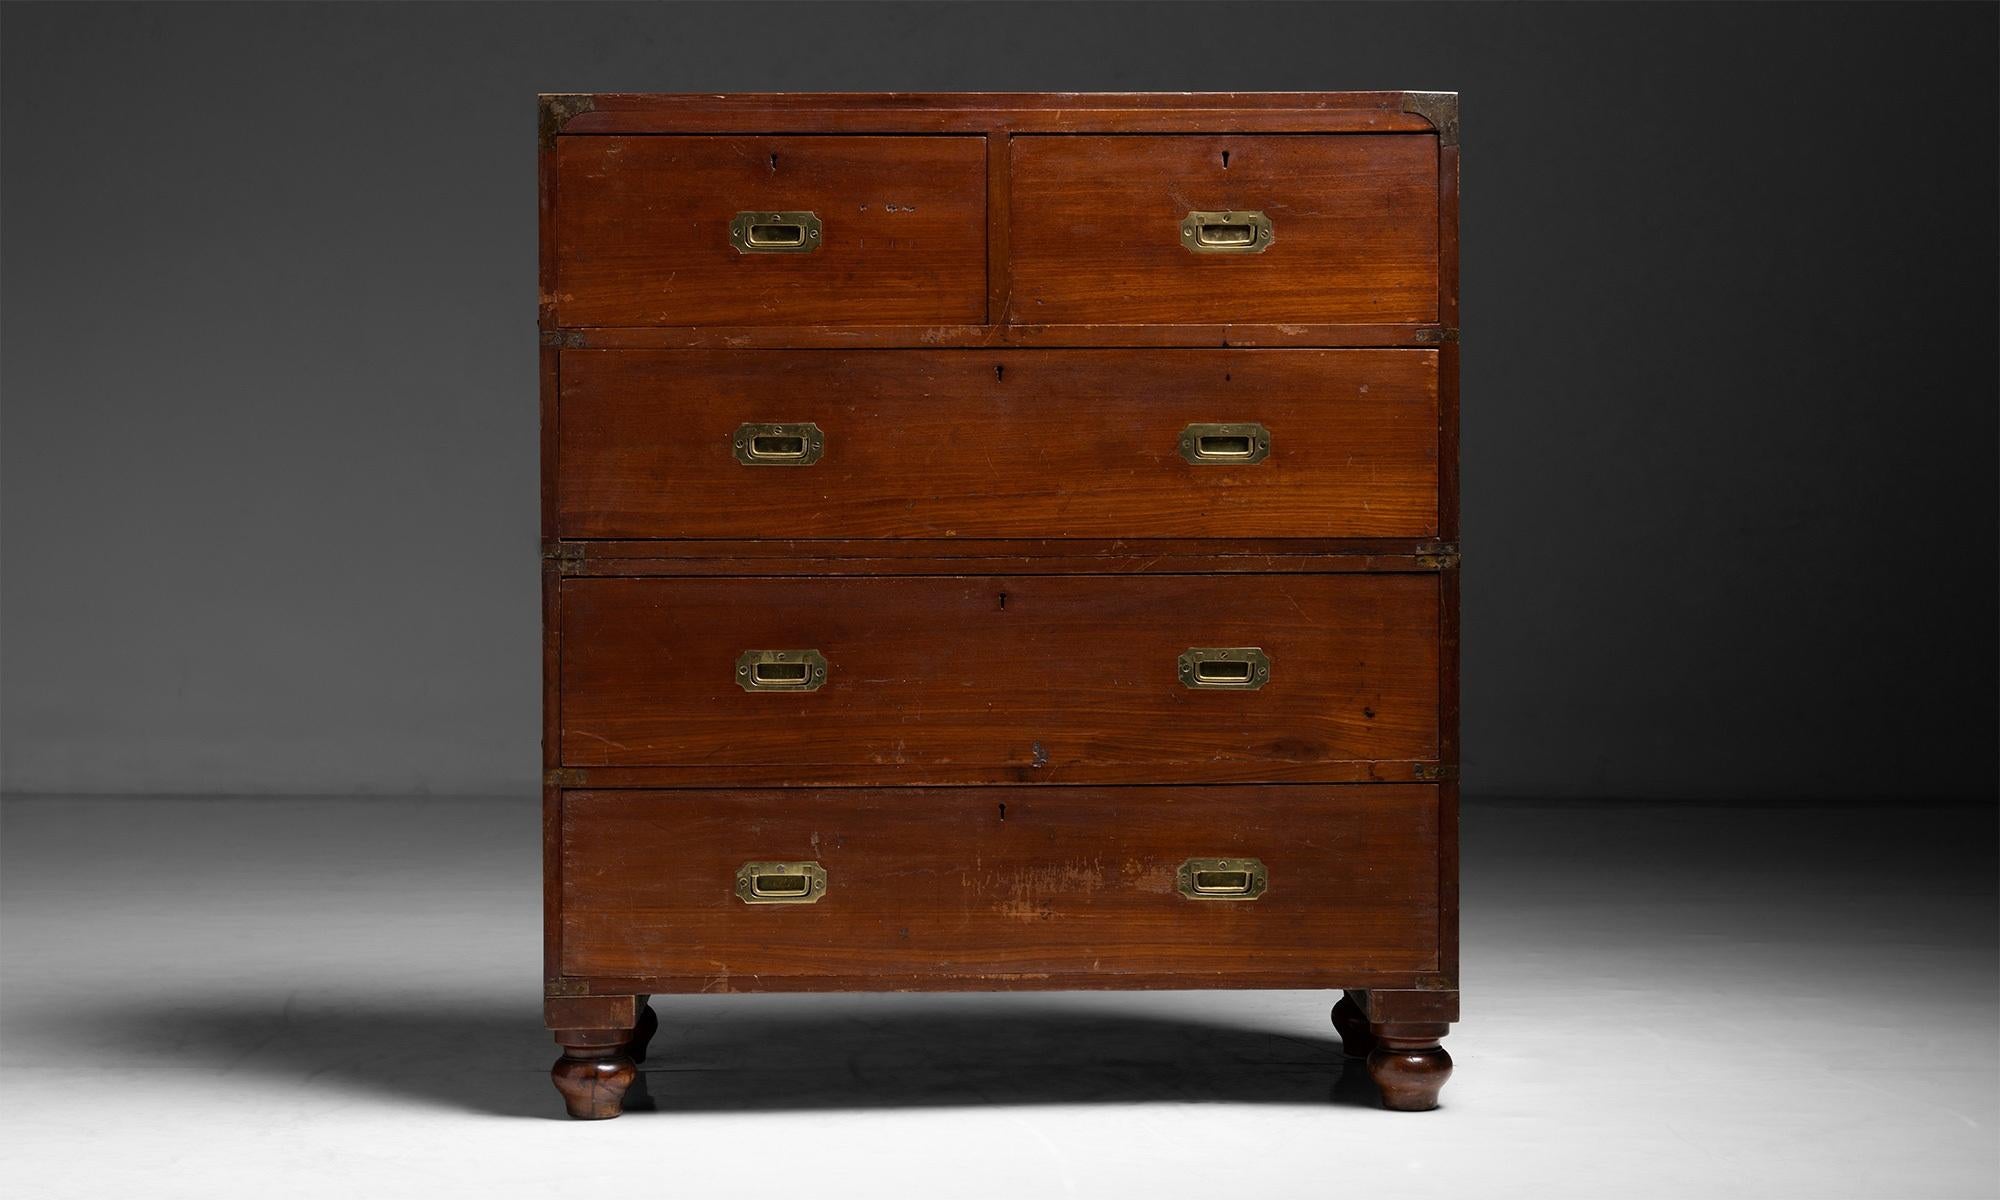 Campaign chest of drawers

England circa 1870

Chest of drawers constructed entirely of camphor wood with original brass hardware and bindings.

Measures: 40.5”L x 17.75”d x 45”h.